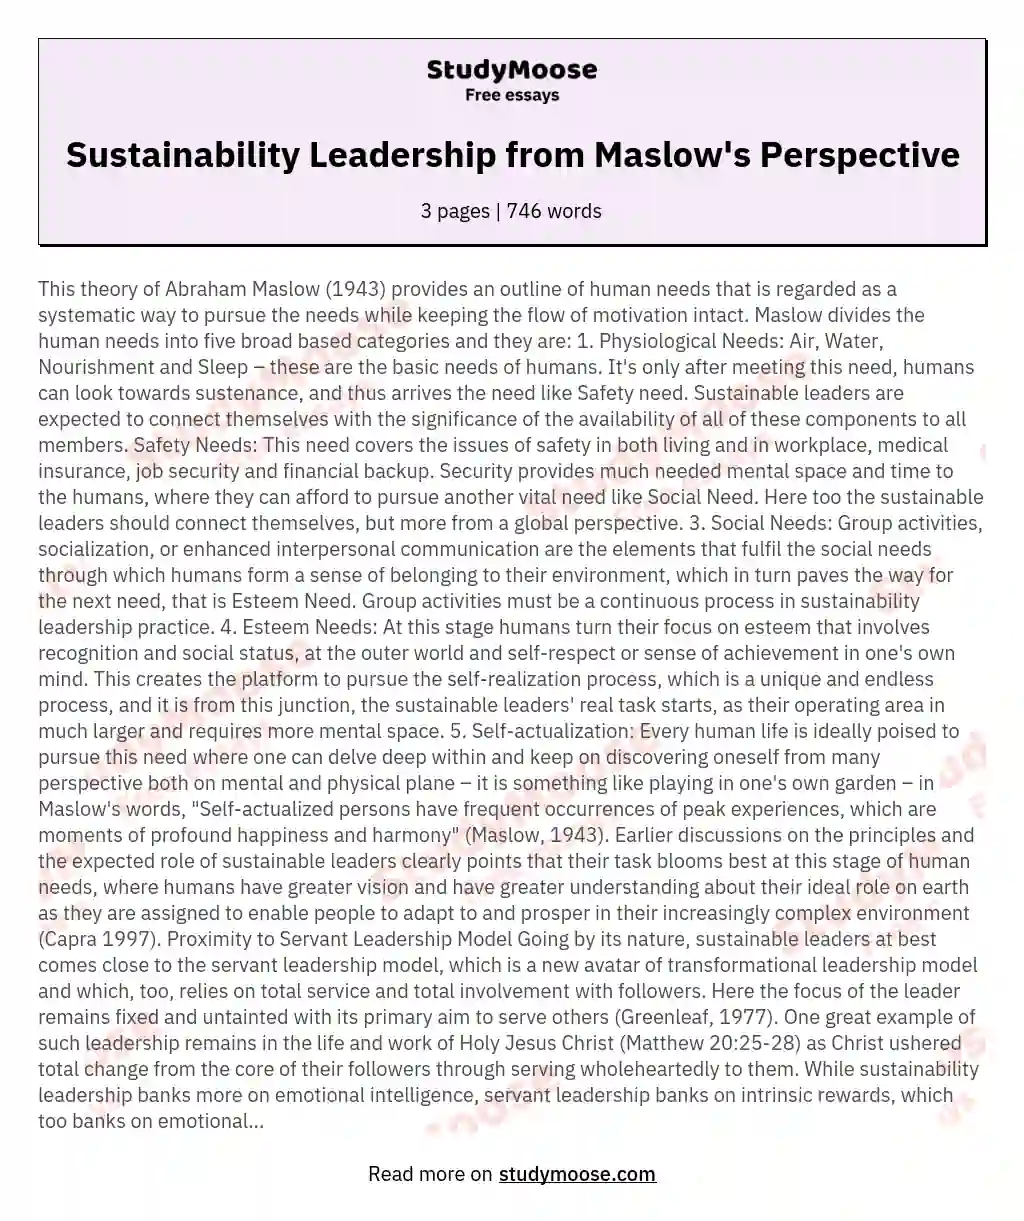 Sustainability Leadership from Maslow's Perspective essay